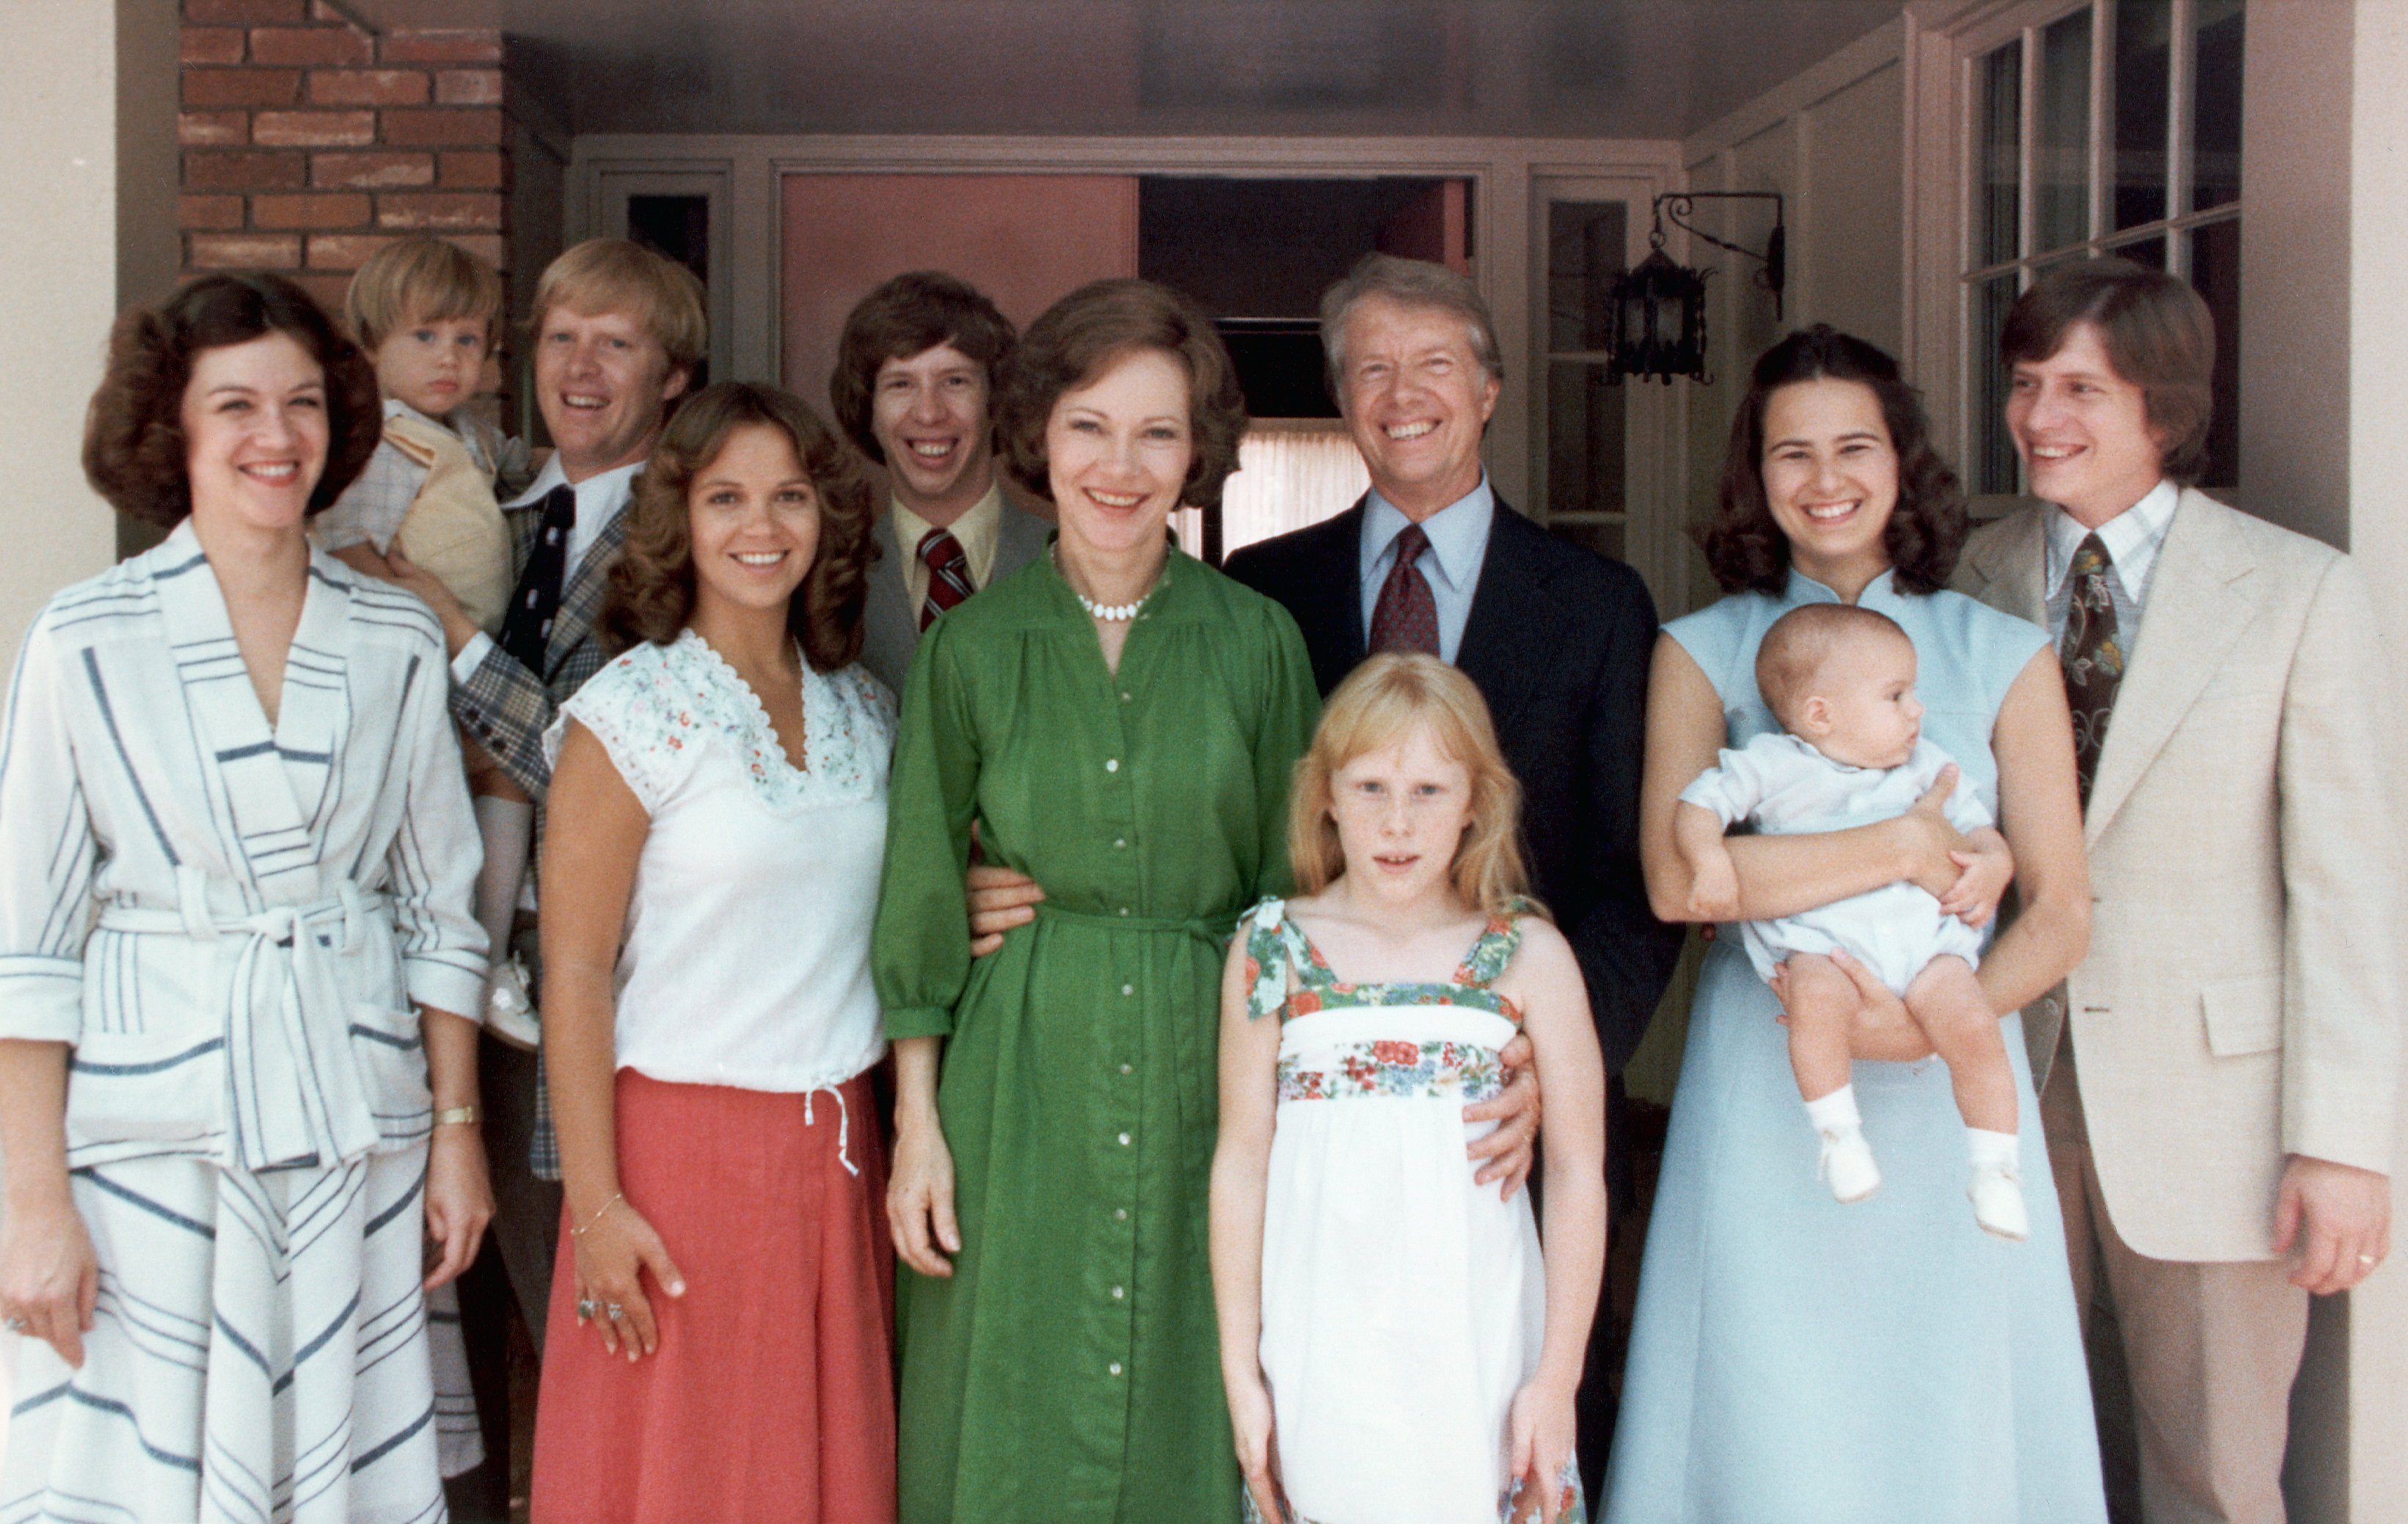 Former U.S. First Lady Rosalynn Carter and former U.S. President Jimmy Carter with their family pictured in a family portrait around 1977-1980 | Source: Getty Images